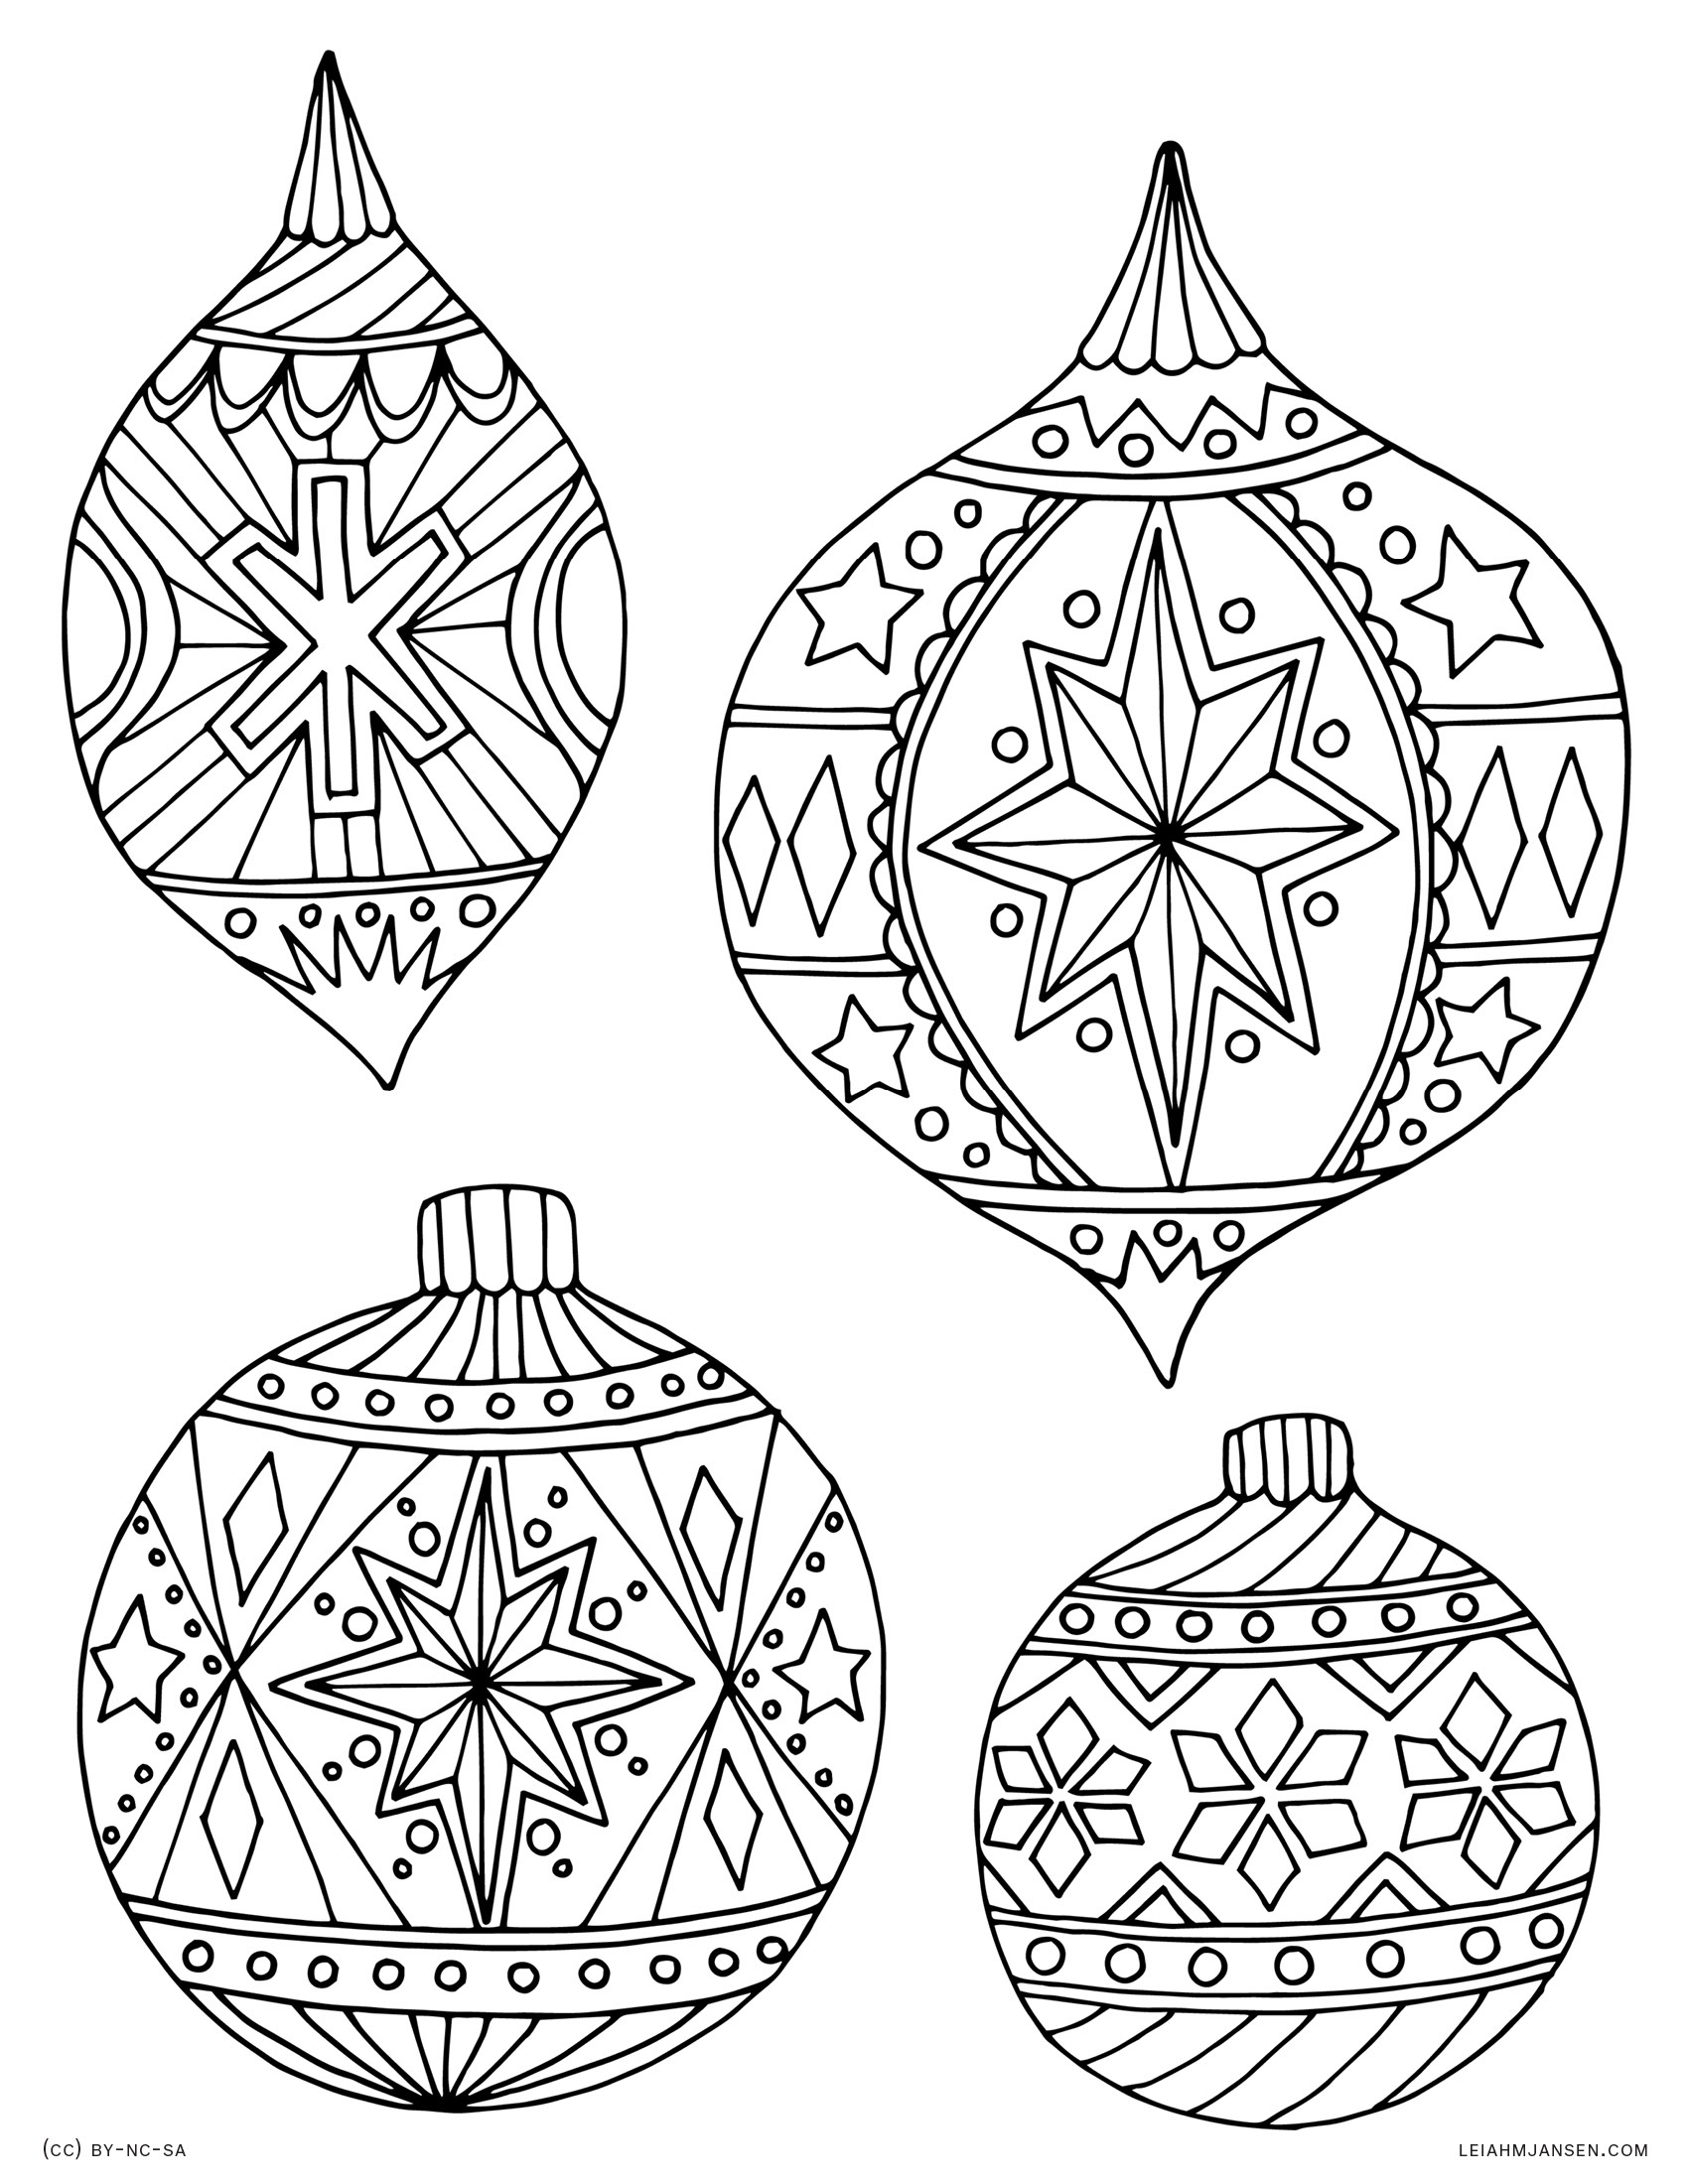 Holiday Coloring Pages - Free Printable Christmas Tree Ornaments Coloring Pages